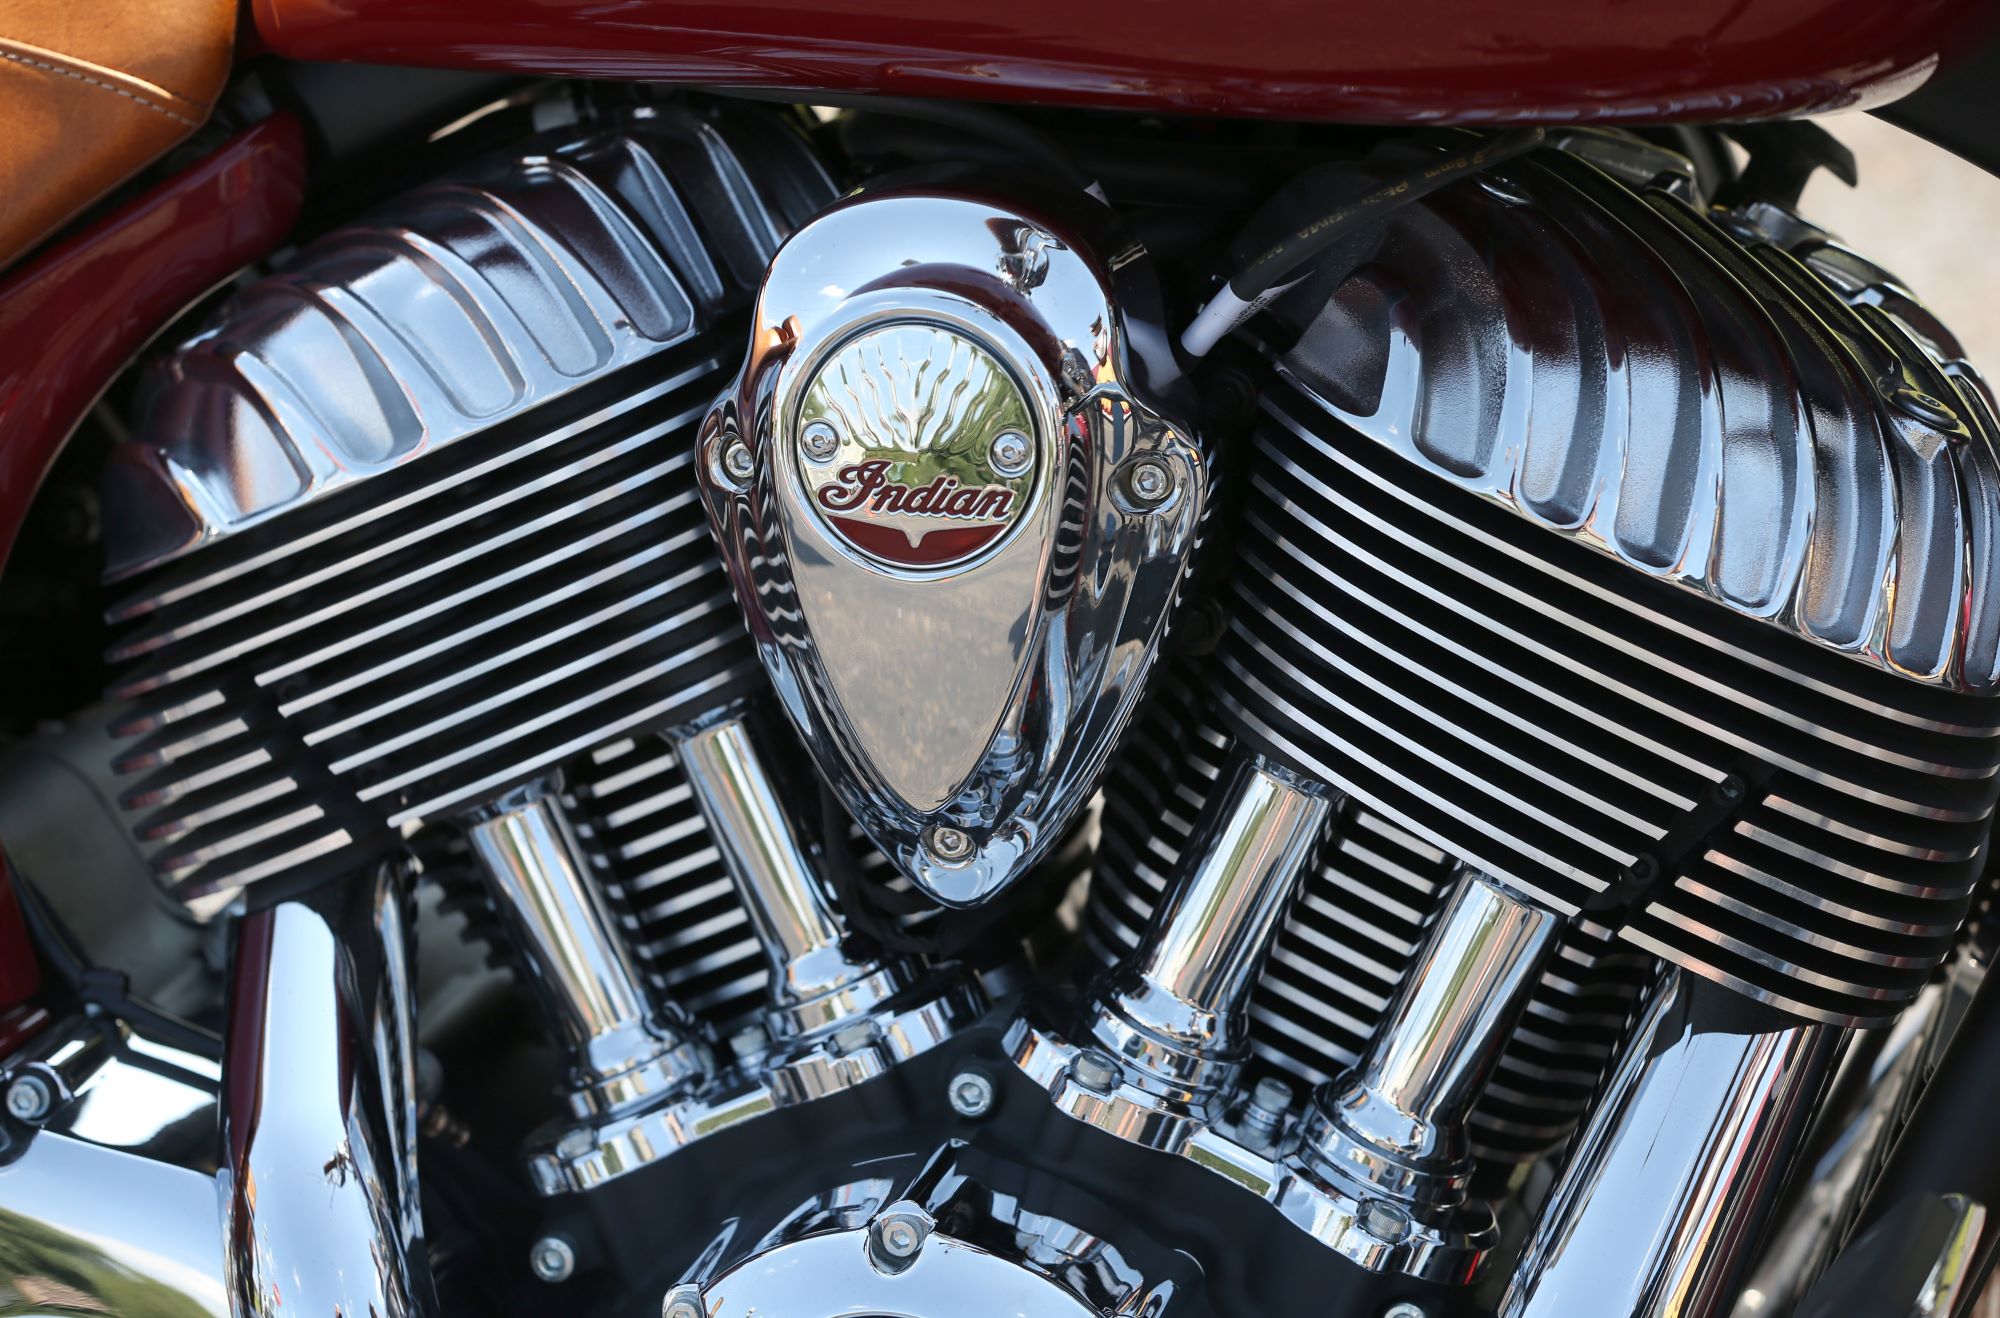 Indian Motorcycle's V-Twin engine with the logo on the plate in between the engines.